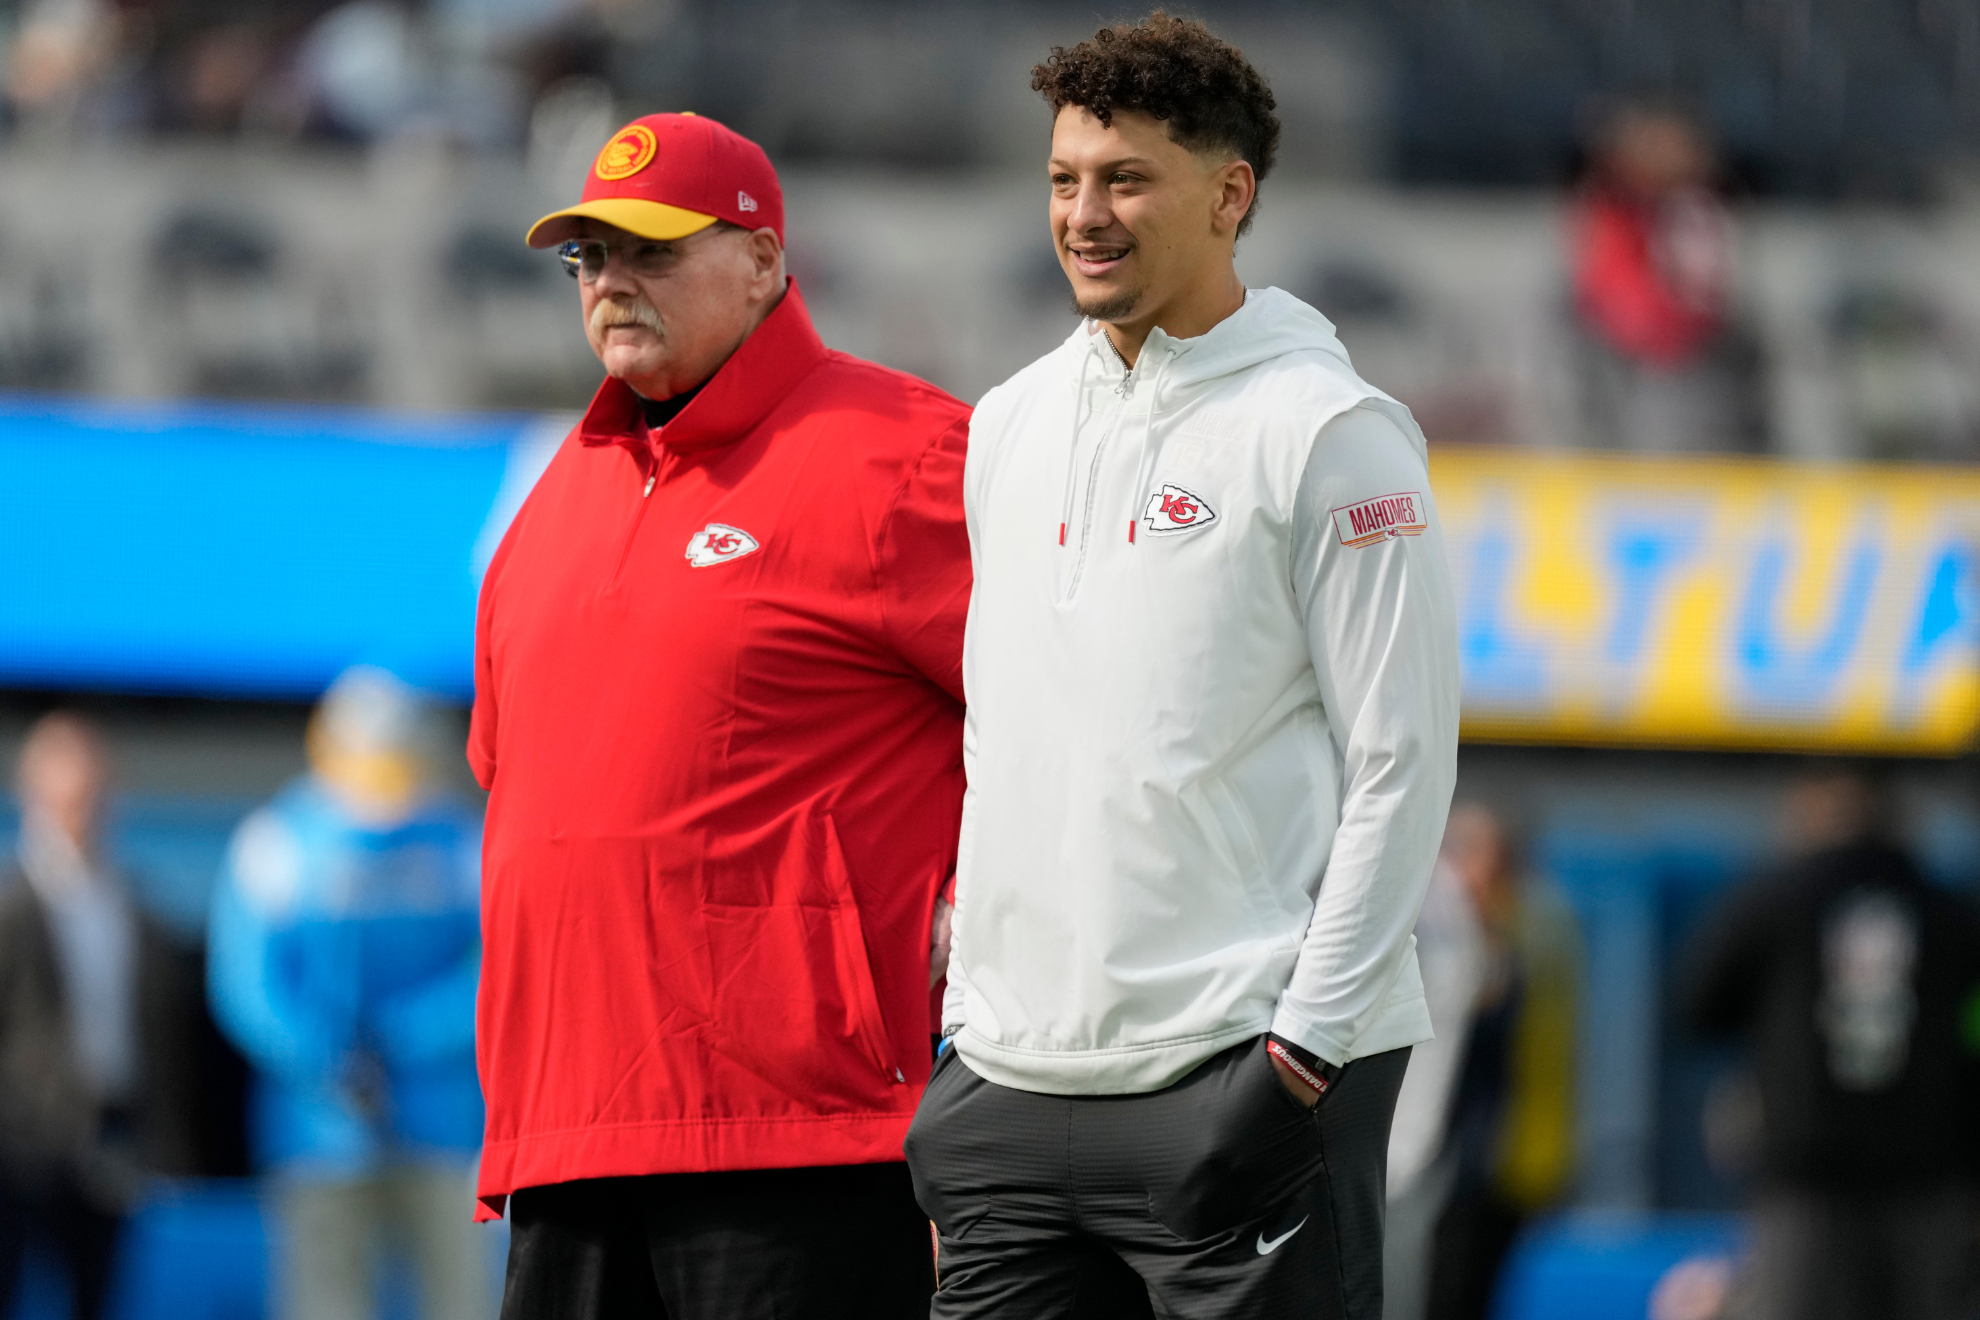 Reid and Mahomes are eyeing a third successive Super Bowl championship.